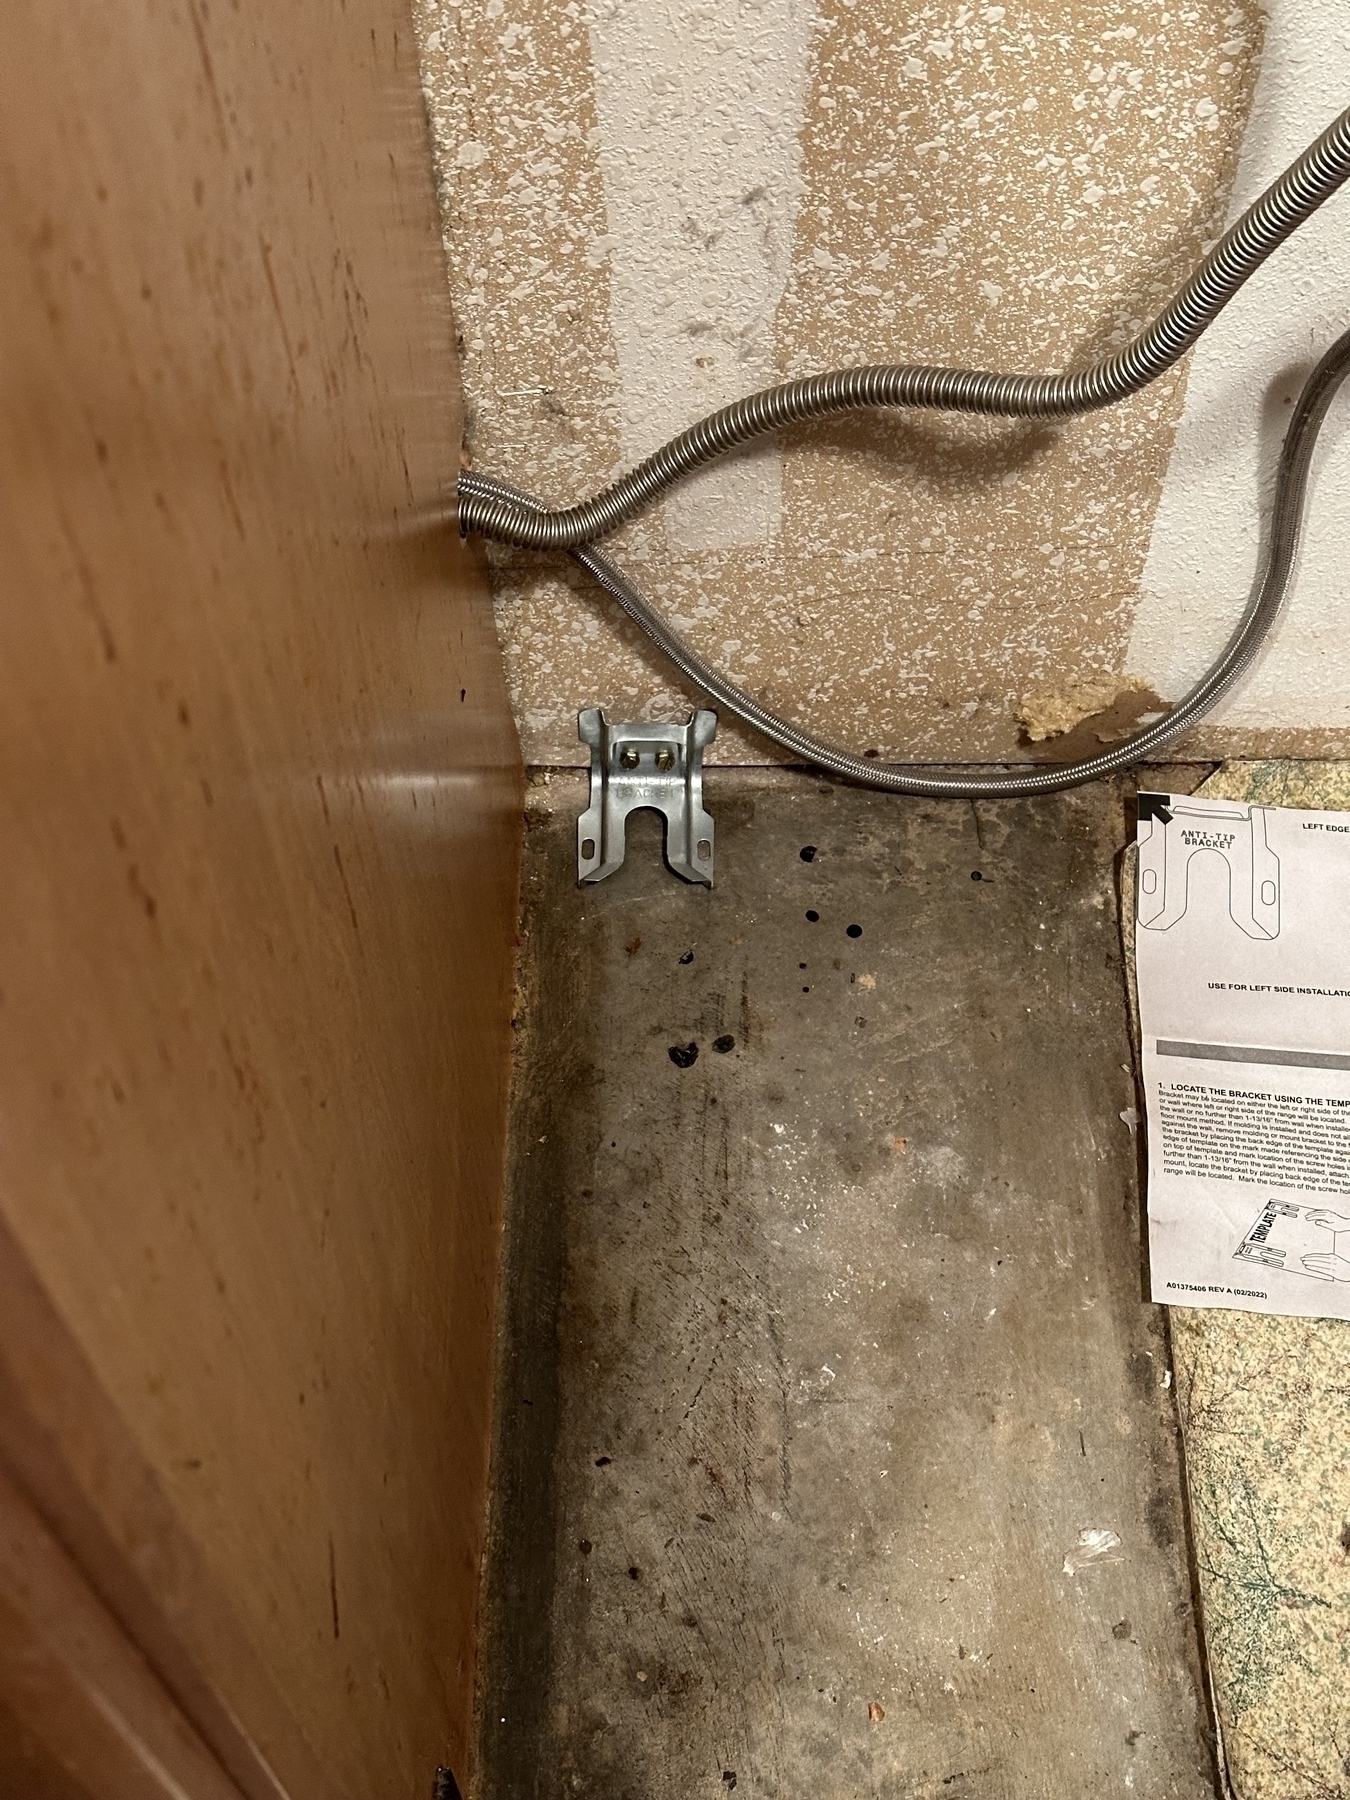 A corner behind a kitchen appliance with a wall and floor showing signs of dirt and residue. There are two metallic conduit pipe, a metal anti-tip bracket, and an installation instruction manual is partially visible on the right side.